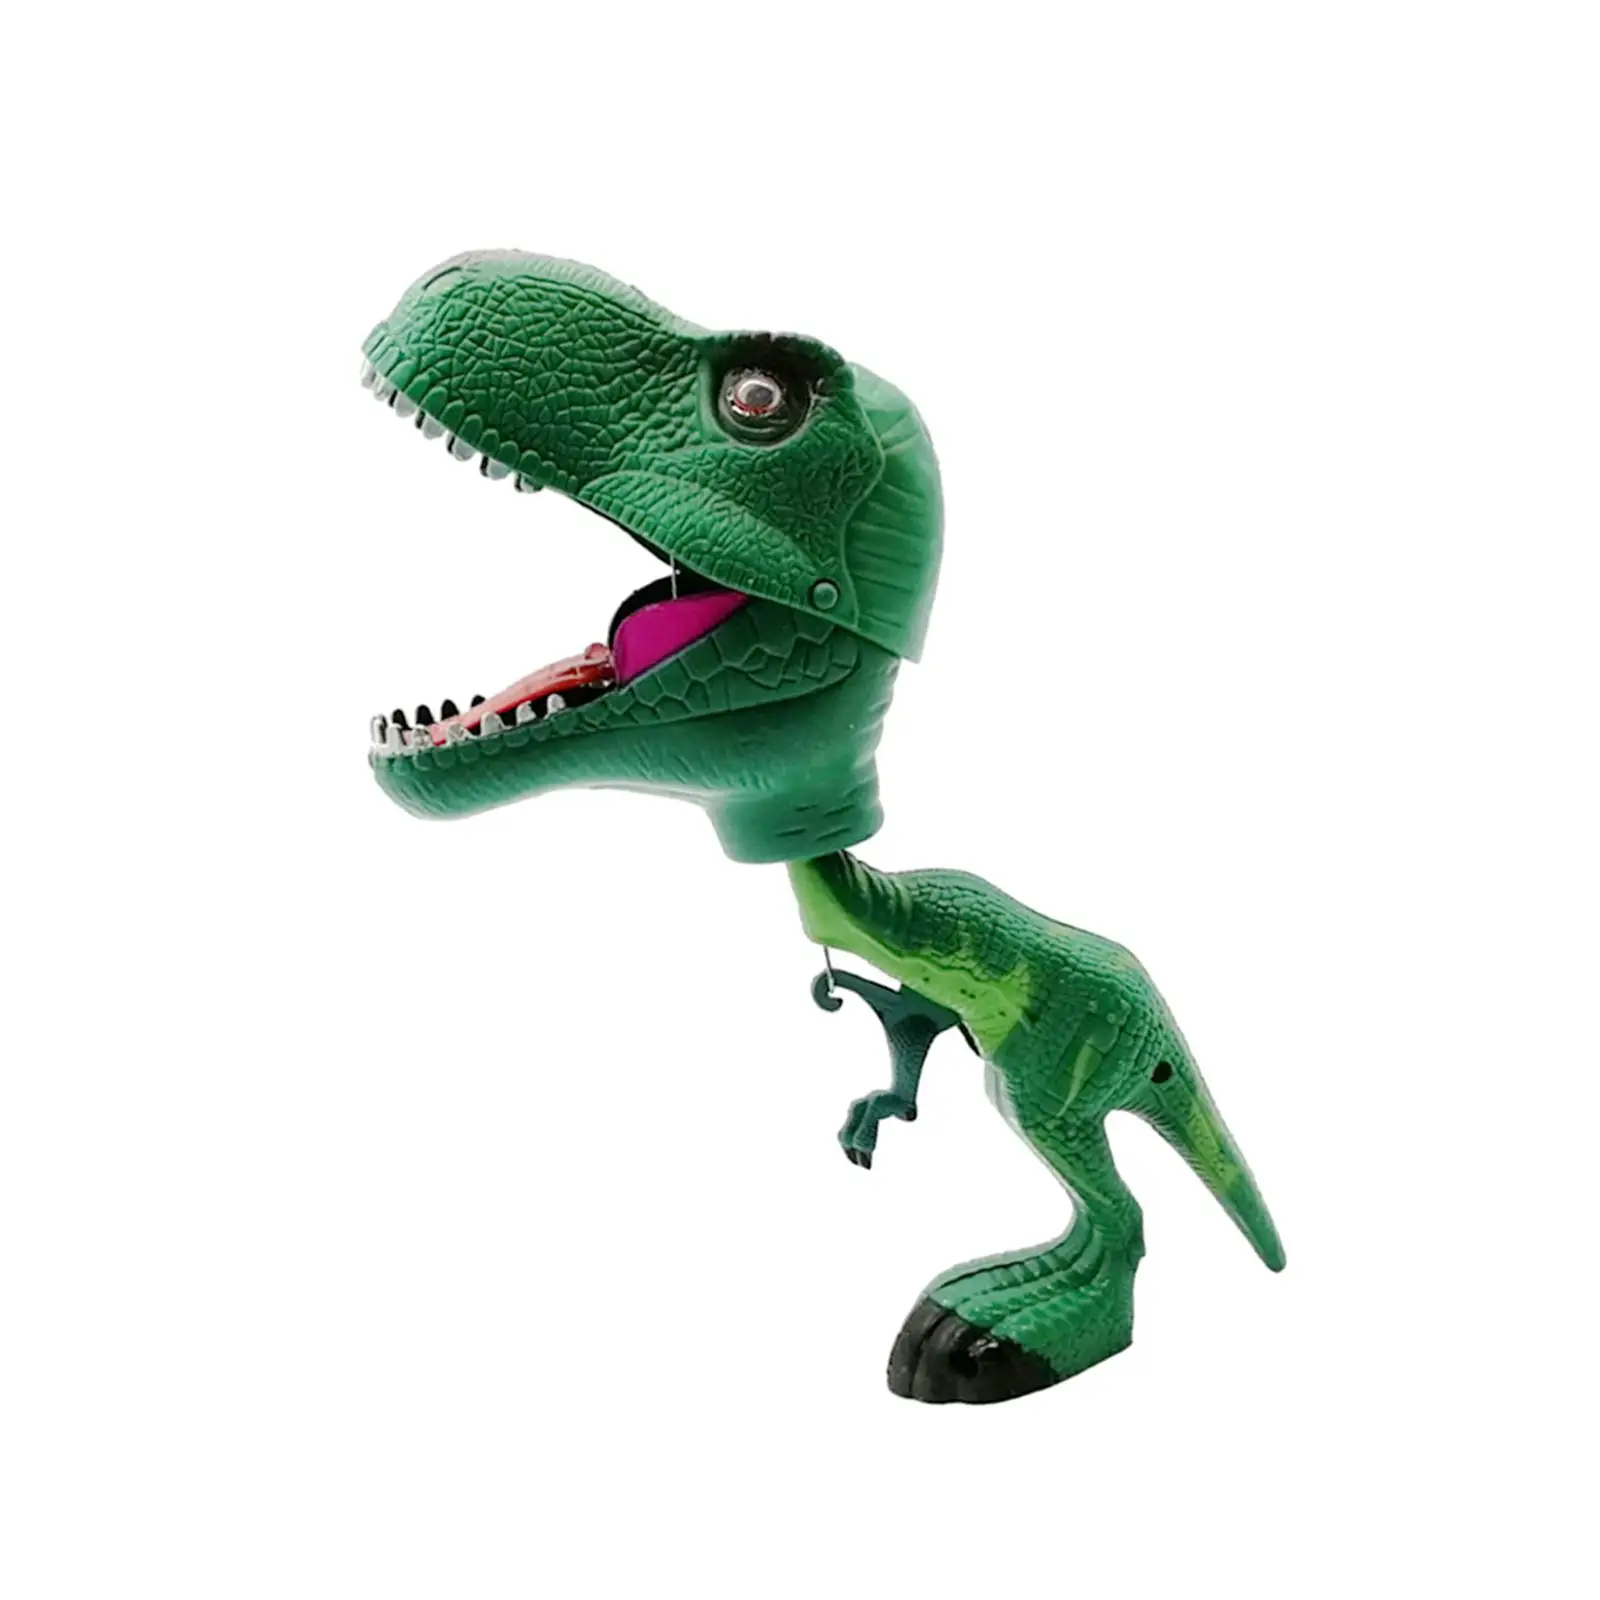 Dinosaur Hand Puppet Toys Toy Reacher Hand Eye Coordination Learning Toy Novelty